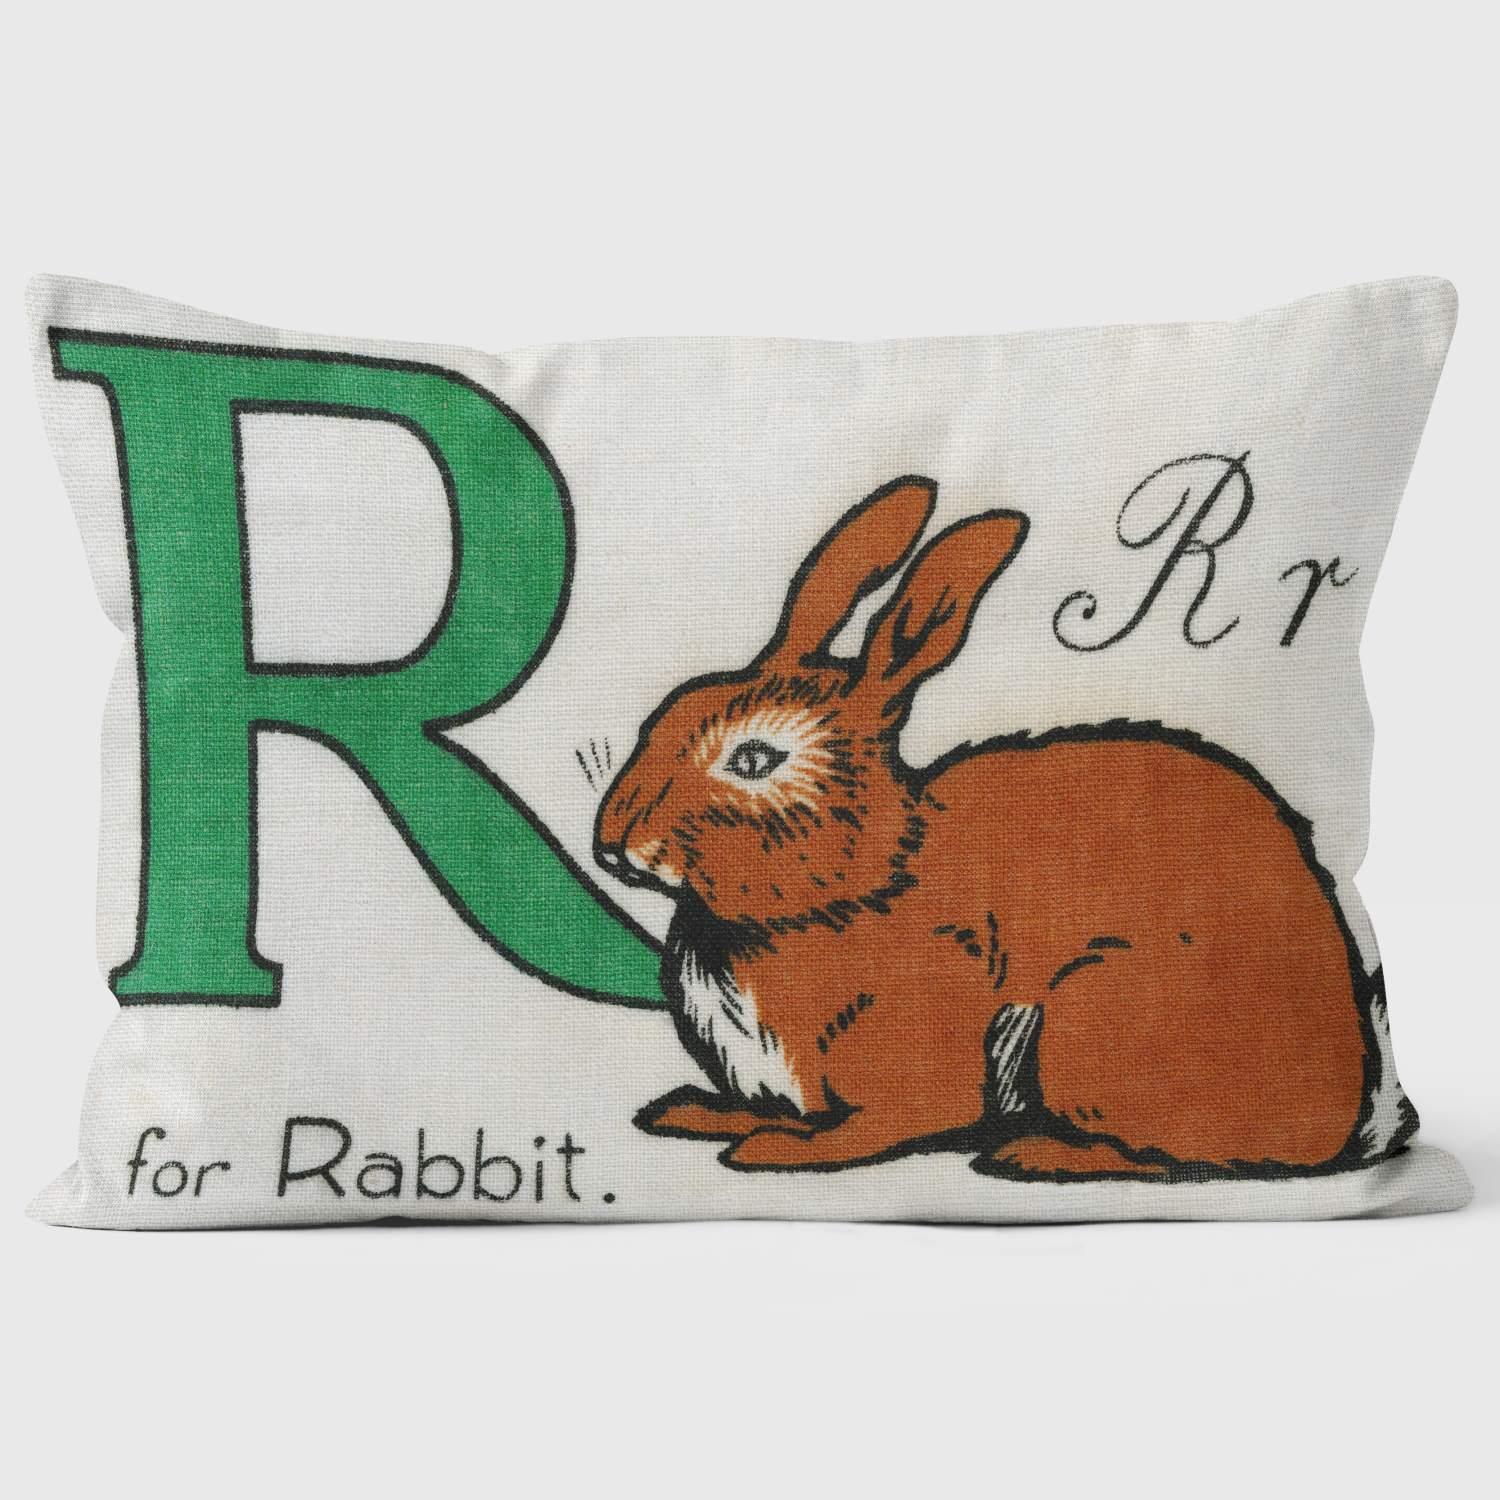 R-Rabbit - Special Occasions Cushion - Handmade Cushions UK - WeLoveCushions